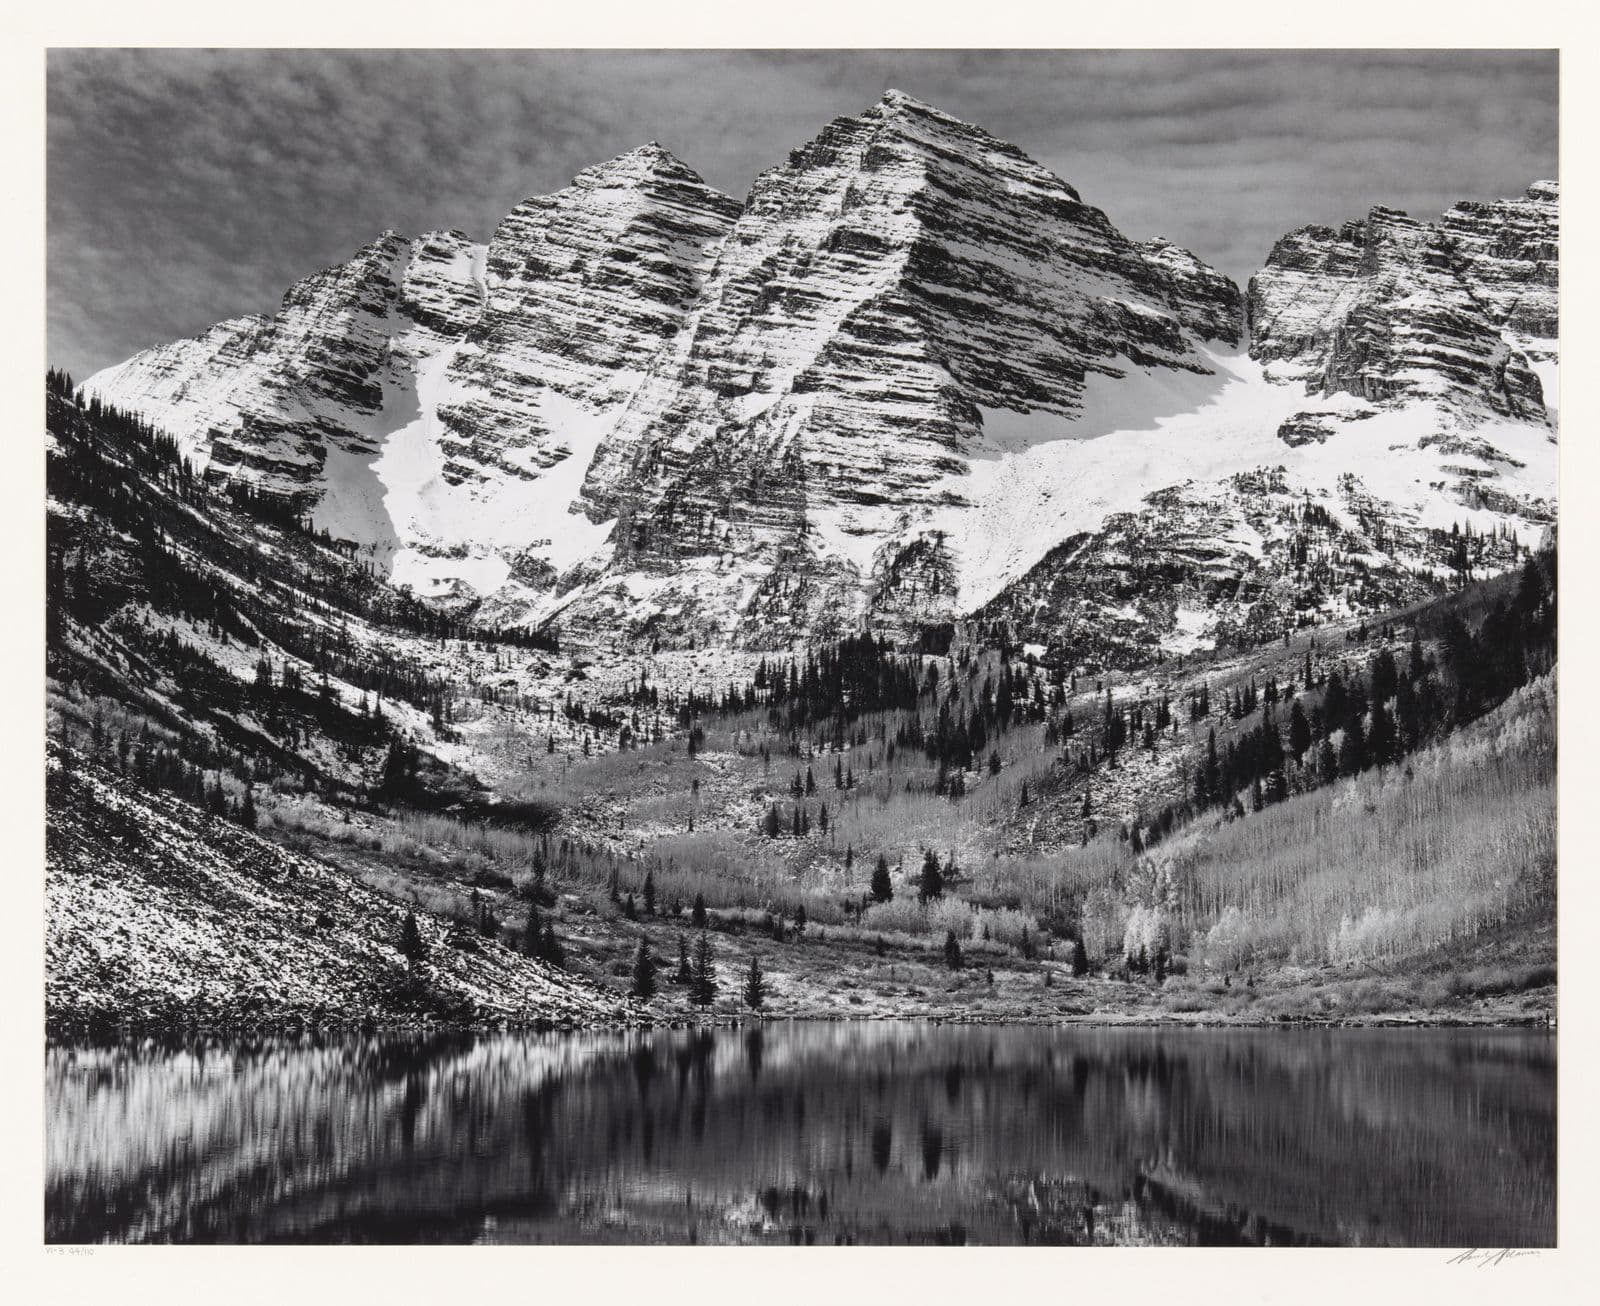 Black and white photograph of a snow capped mountains